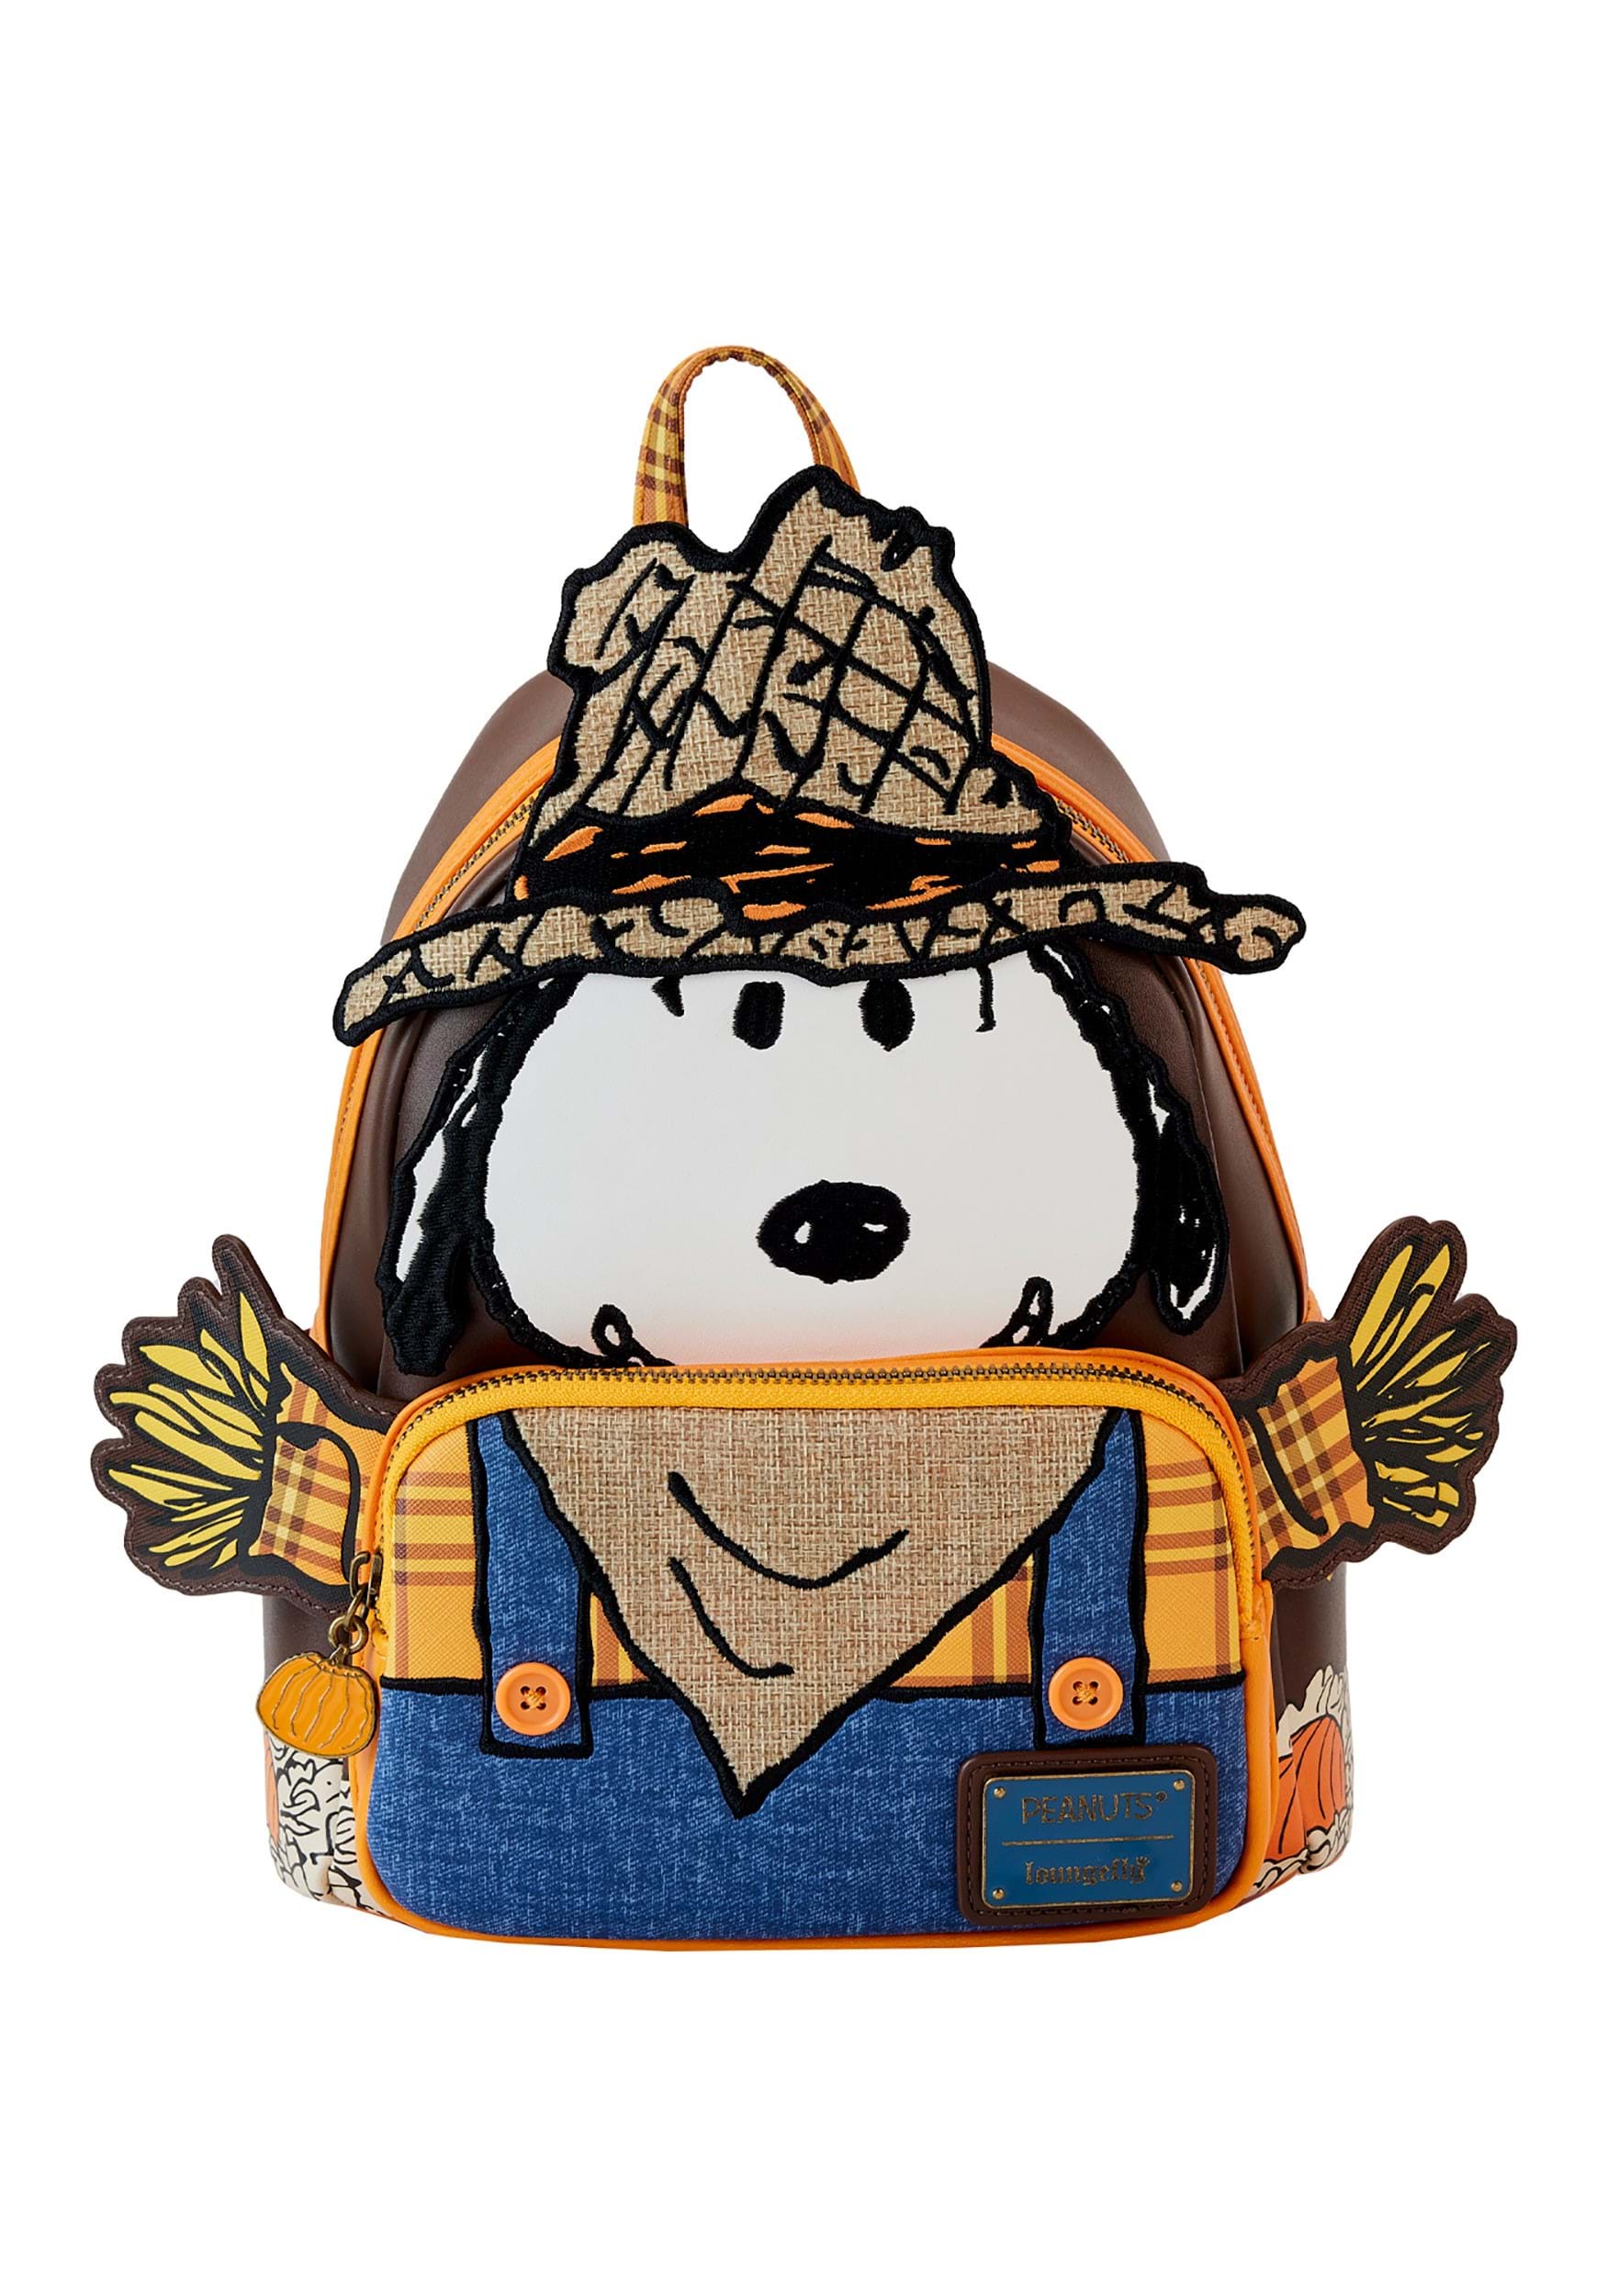 Peanuts Snoopy Scarecrow Cosplay Mini Backpack by Loungefly